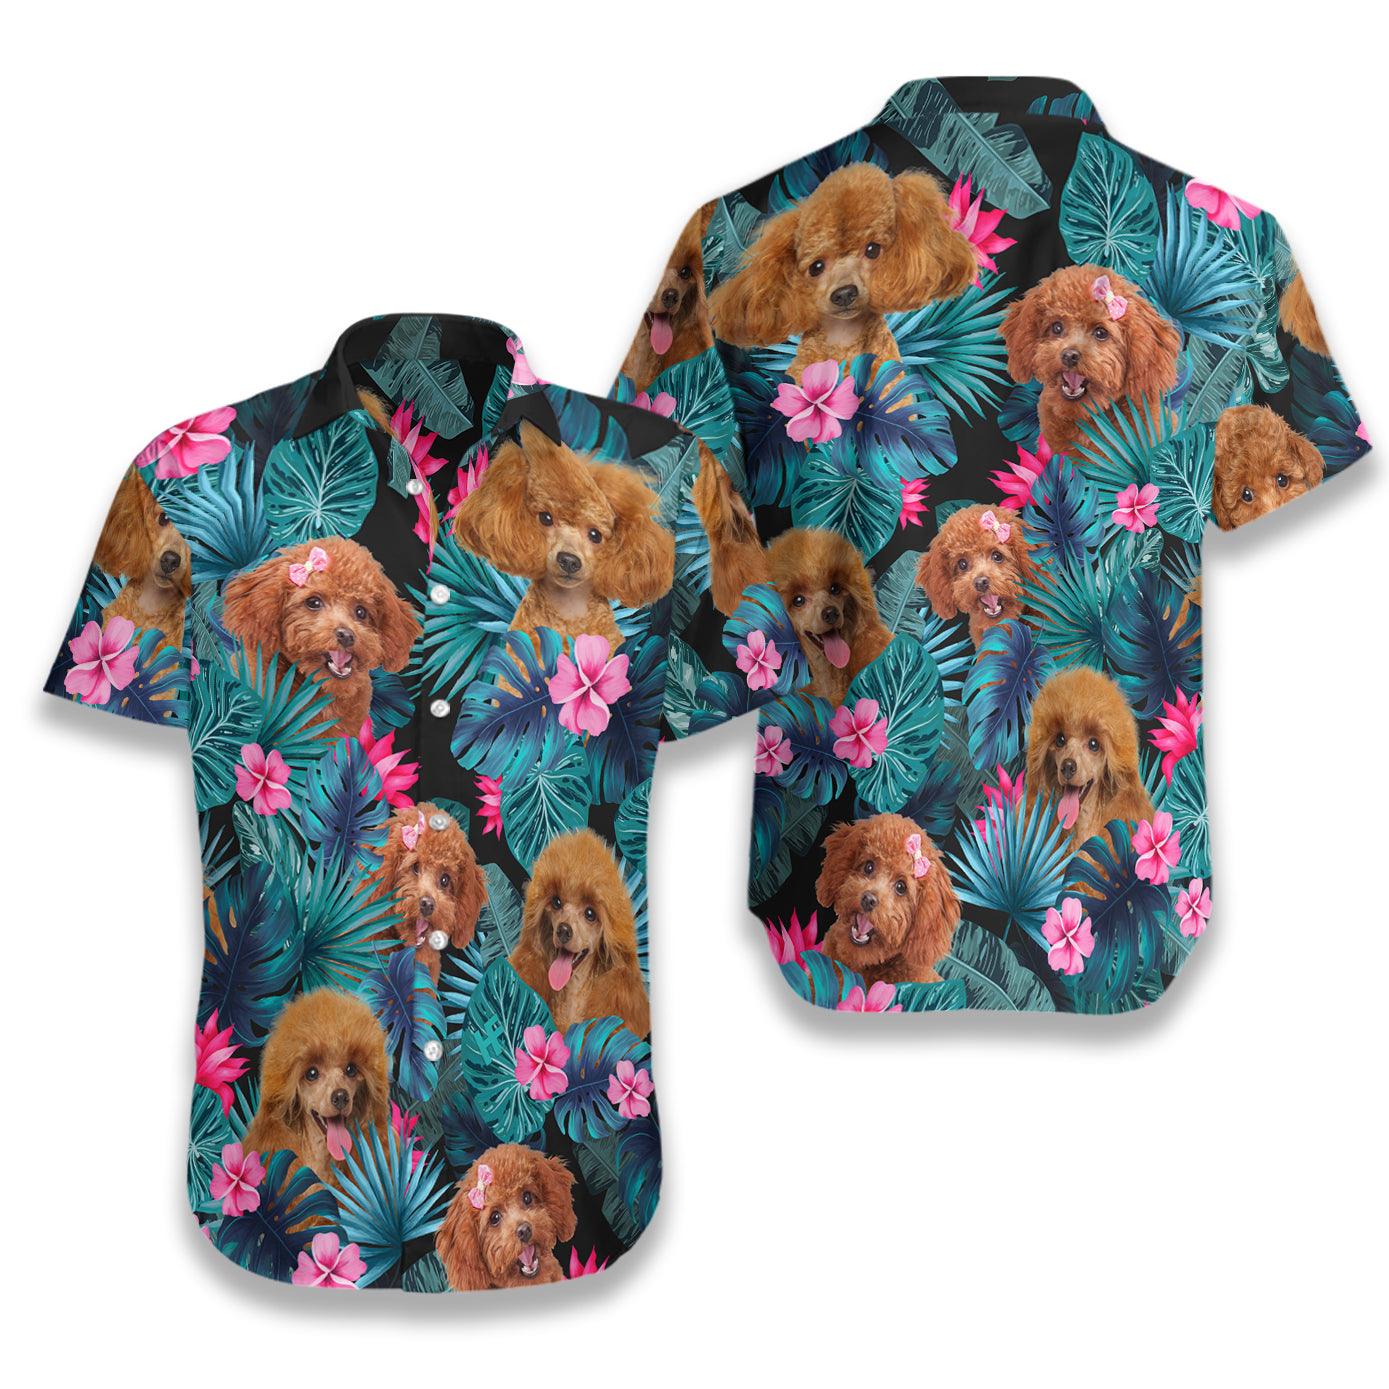 Poodle Hawaiian Shirt, Tropical Colorful Summer Aloha Shirt For Men Women, Perfect Gift For Friend, Family, Dog Lovers, Poodle Mom Dad - Amzanimalsgift